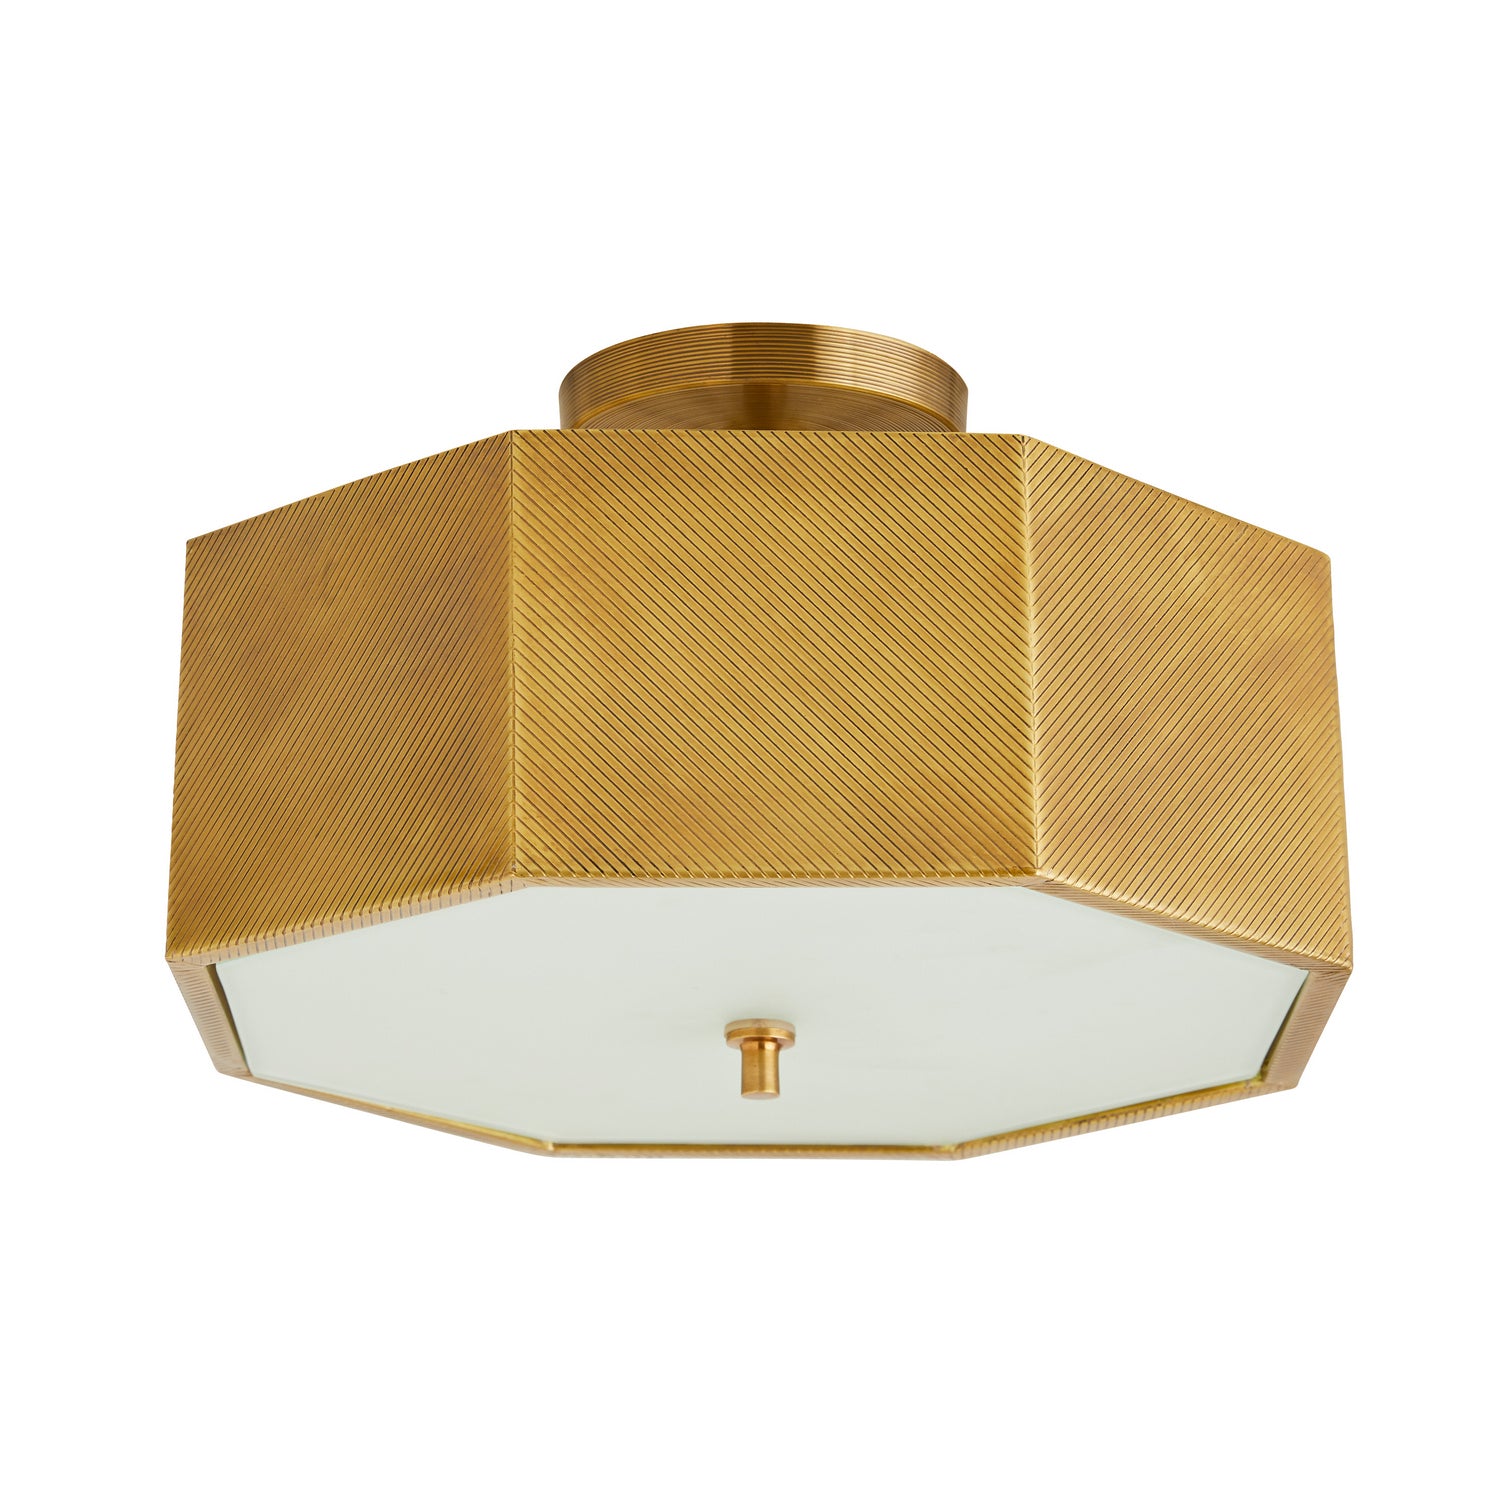 Two Light Semi-Flush Mount from the Grespan collection in Antique Brass finish